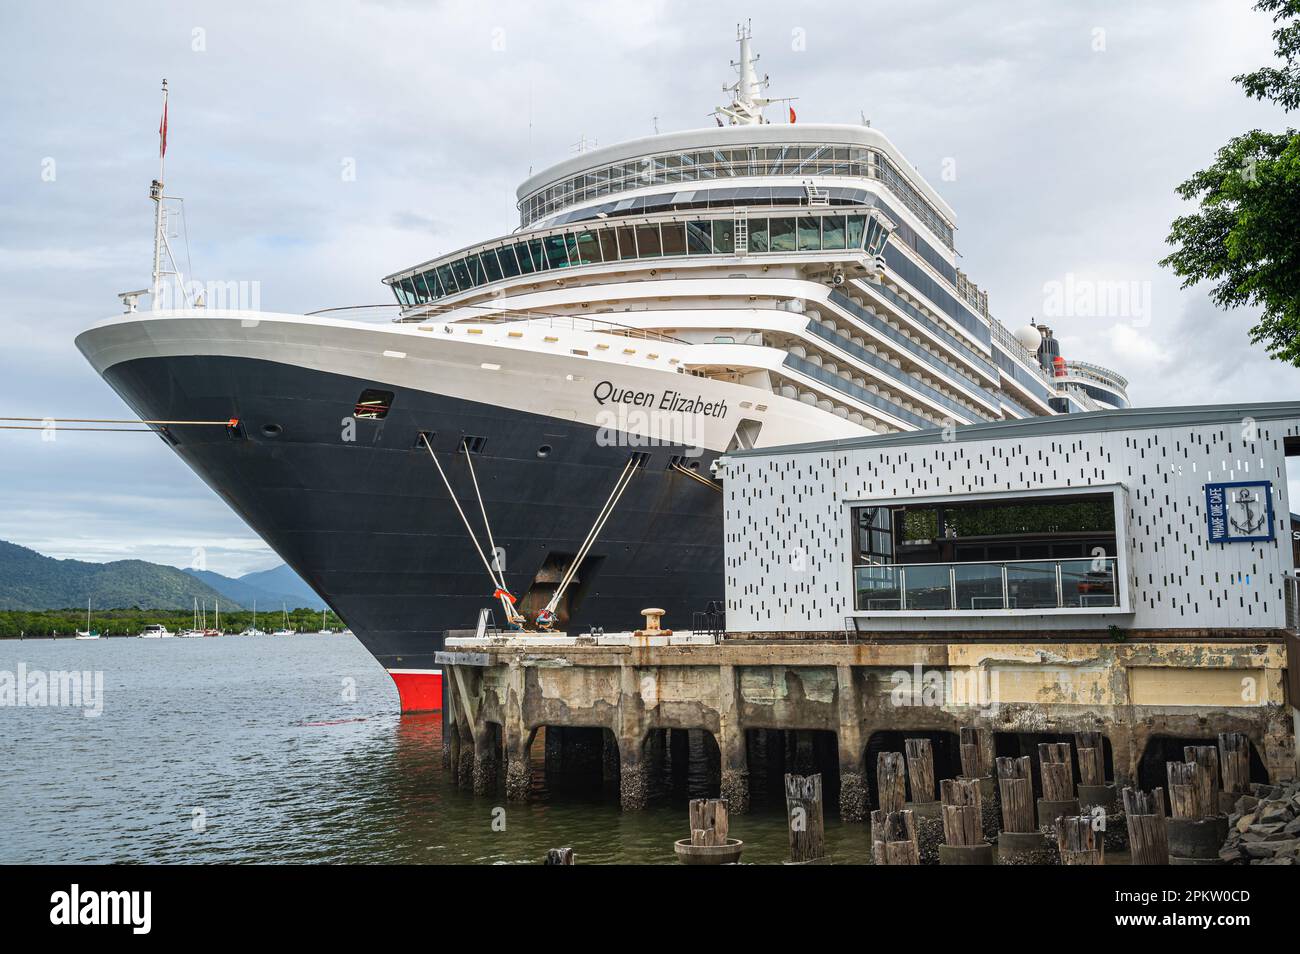 A front on view of the docked Cunard cruise liner Queen Elizabeth at the Cairns Port Authority wharf, Queensland, Australia. Stock Photo